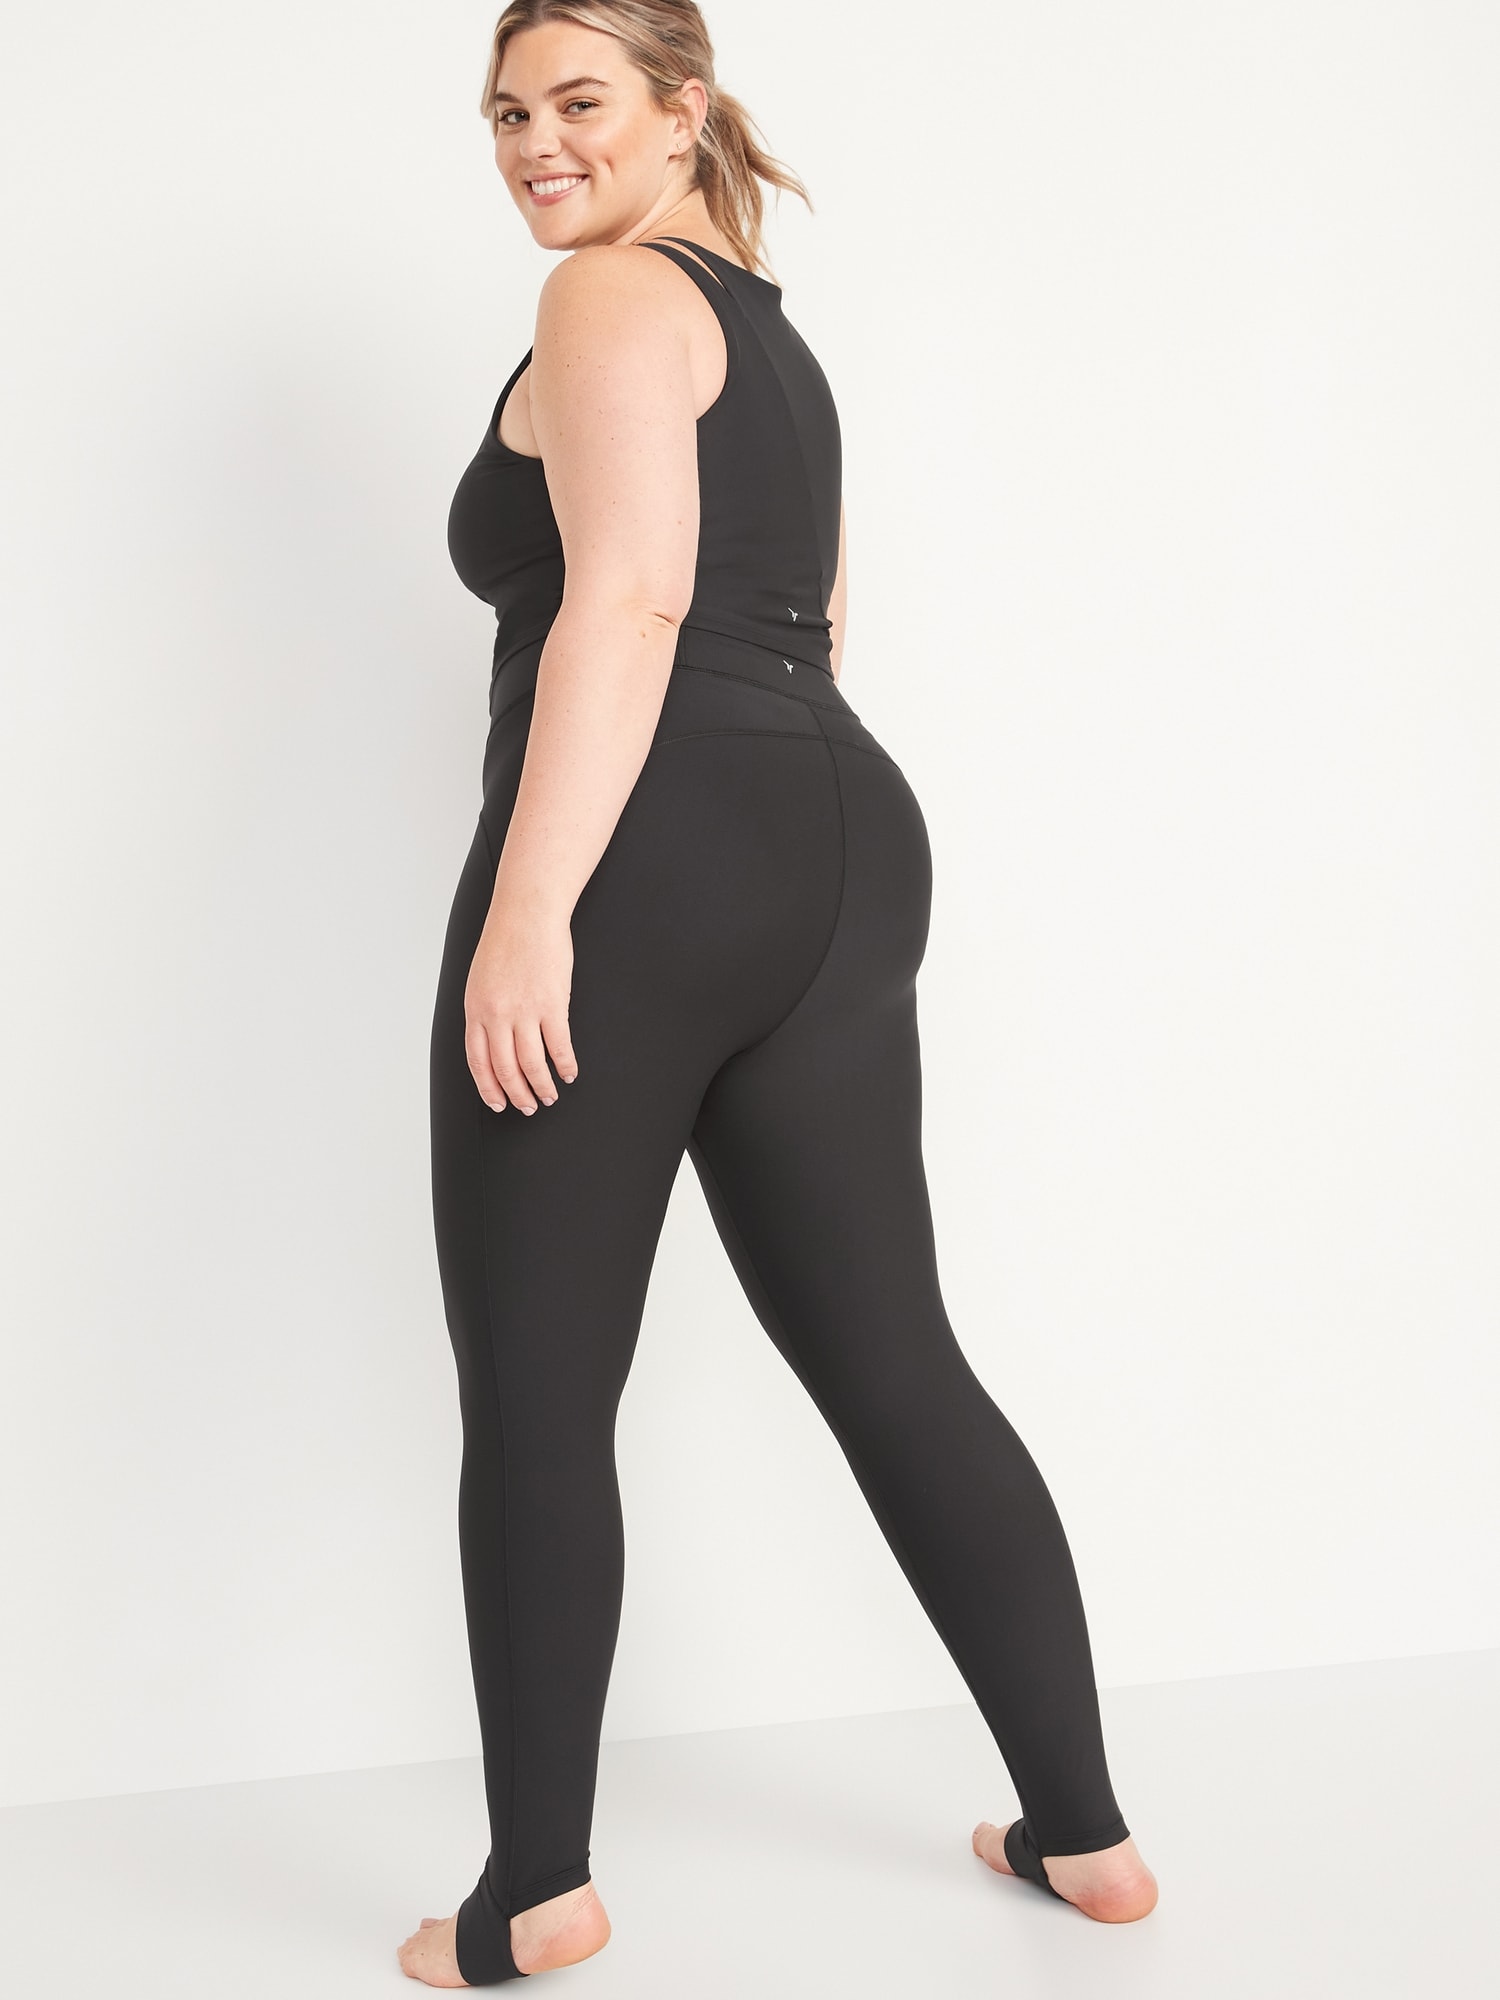 Extra High-Waisted PowerSoft Stirrup Leggings for Women